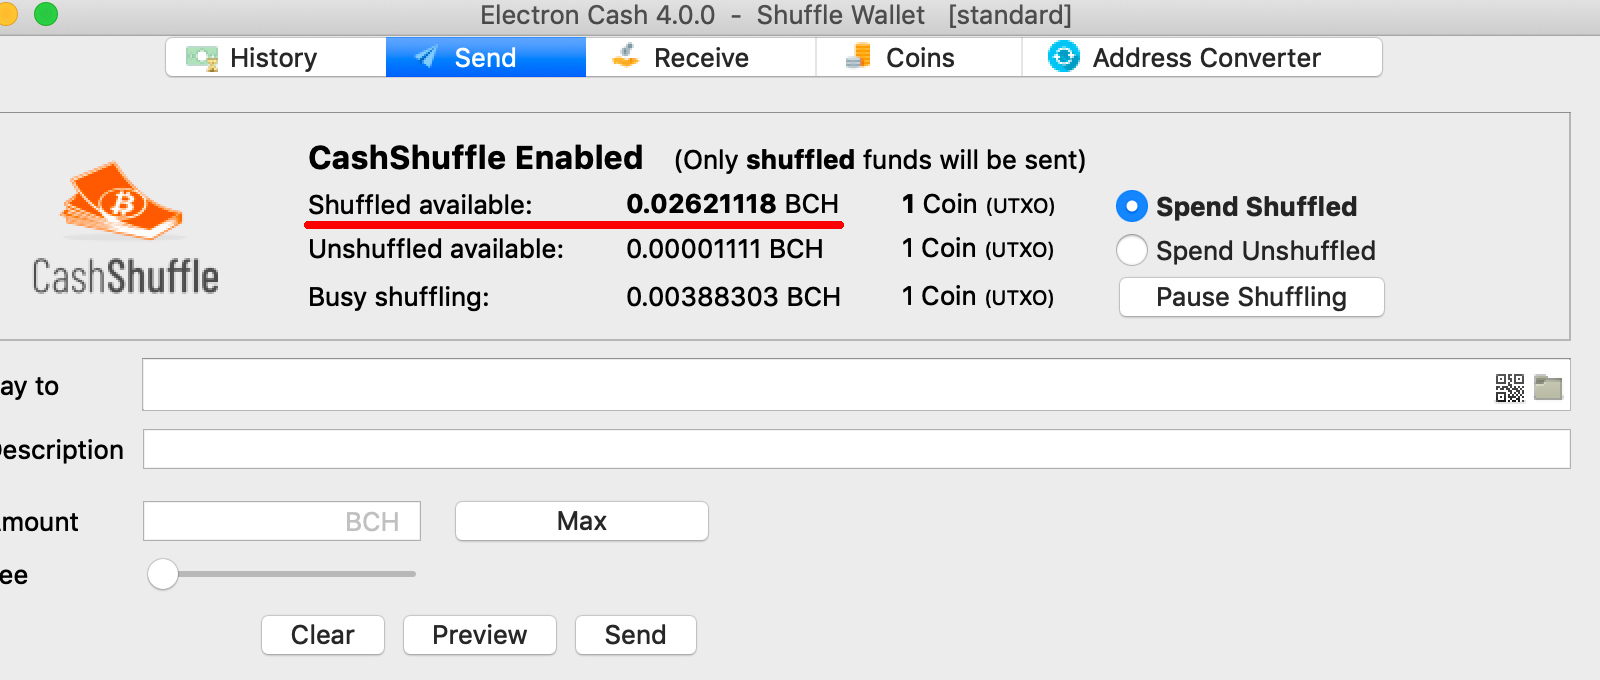 Cashshuffle Launches, Bringing Greater Privacy to the BCH Ecosystem